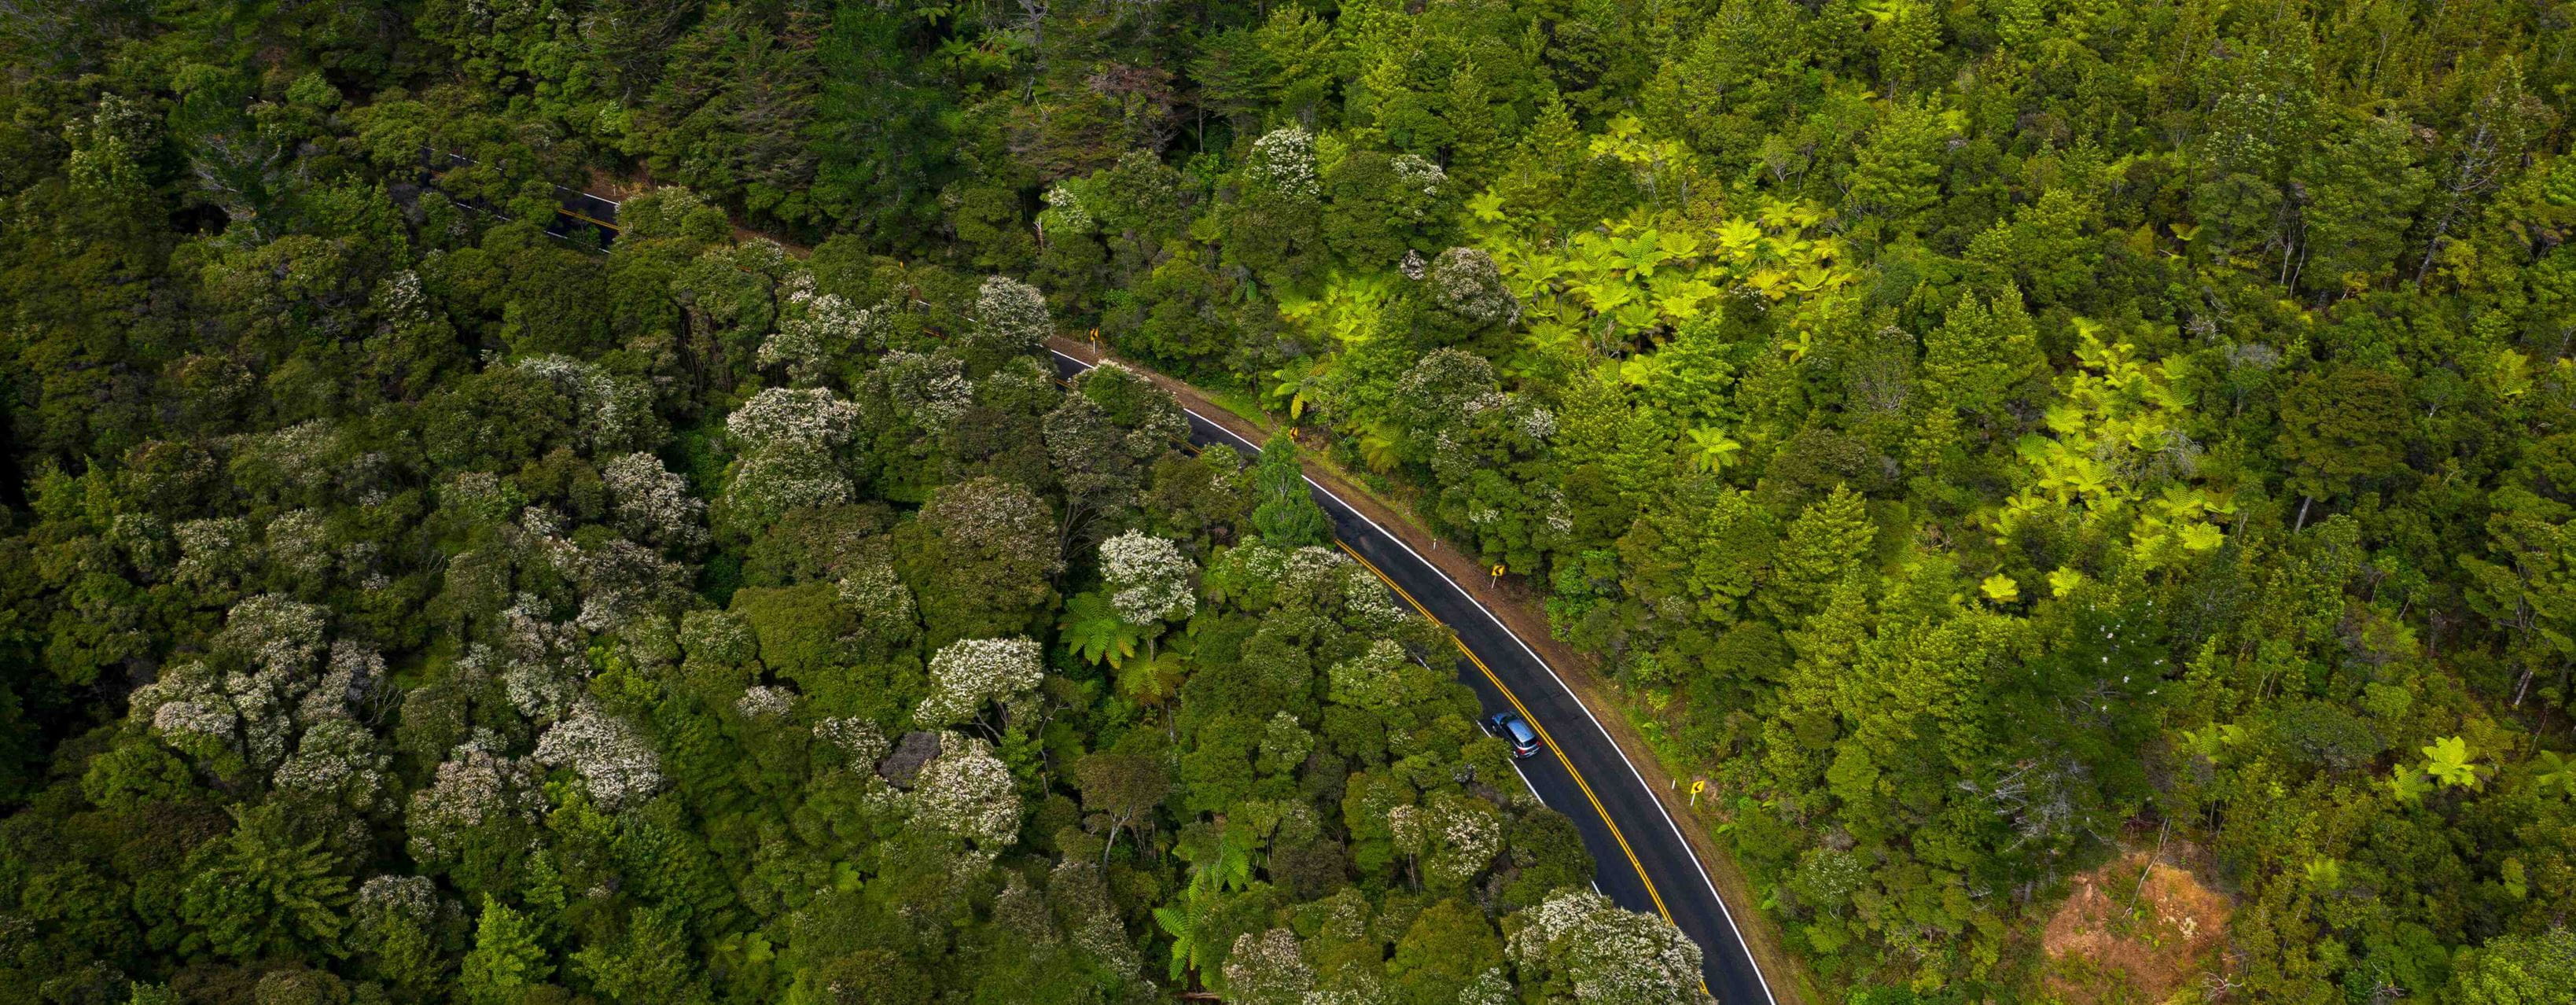 Drone image of car driving in forest